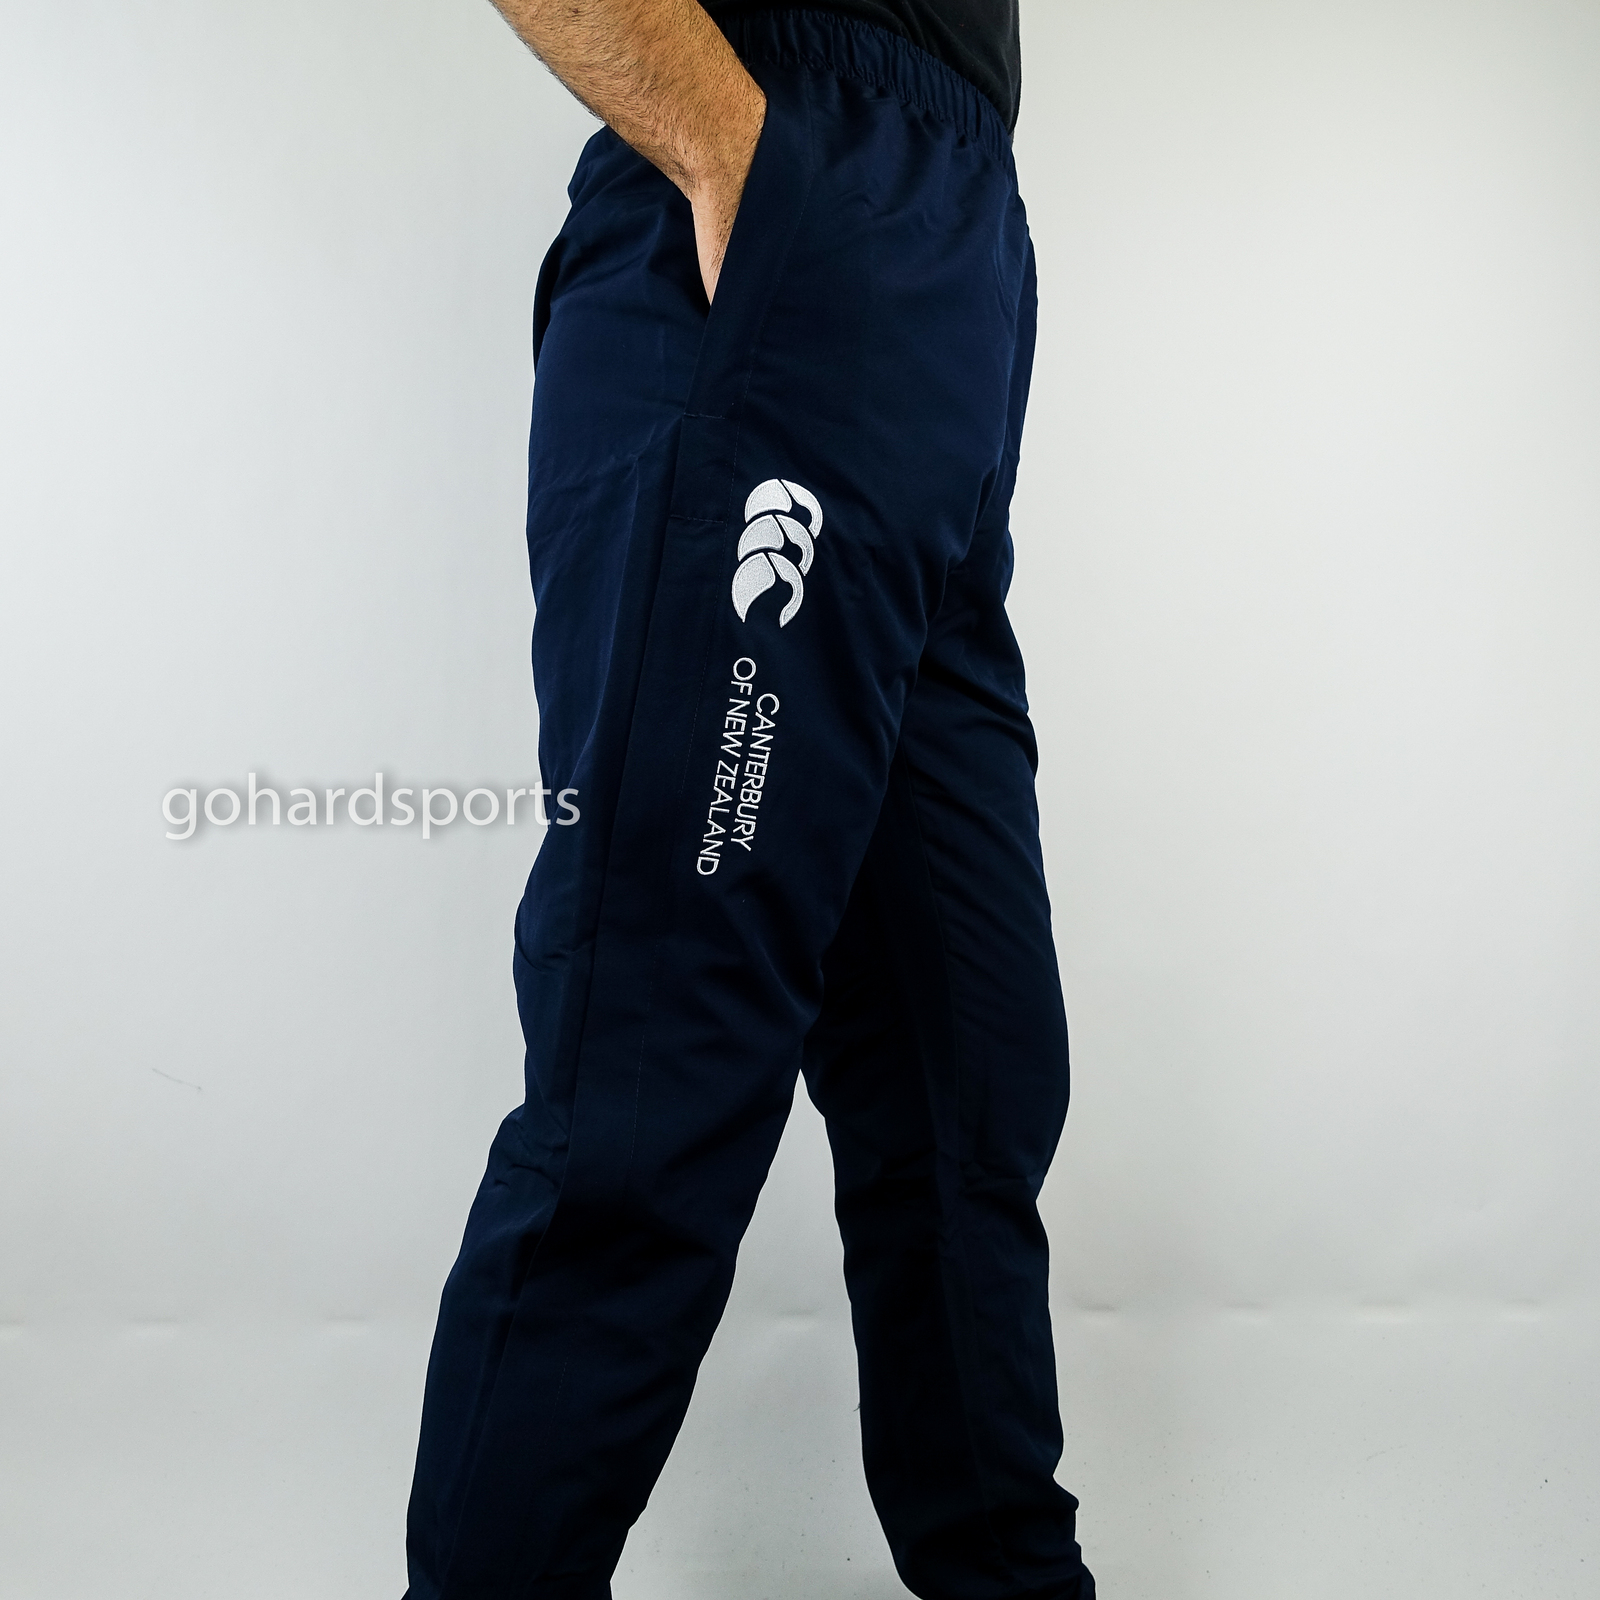 CCC Womens Tapered  Cuffed Uglies Stadium Pants in Peacoat Navy